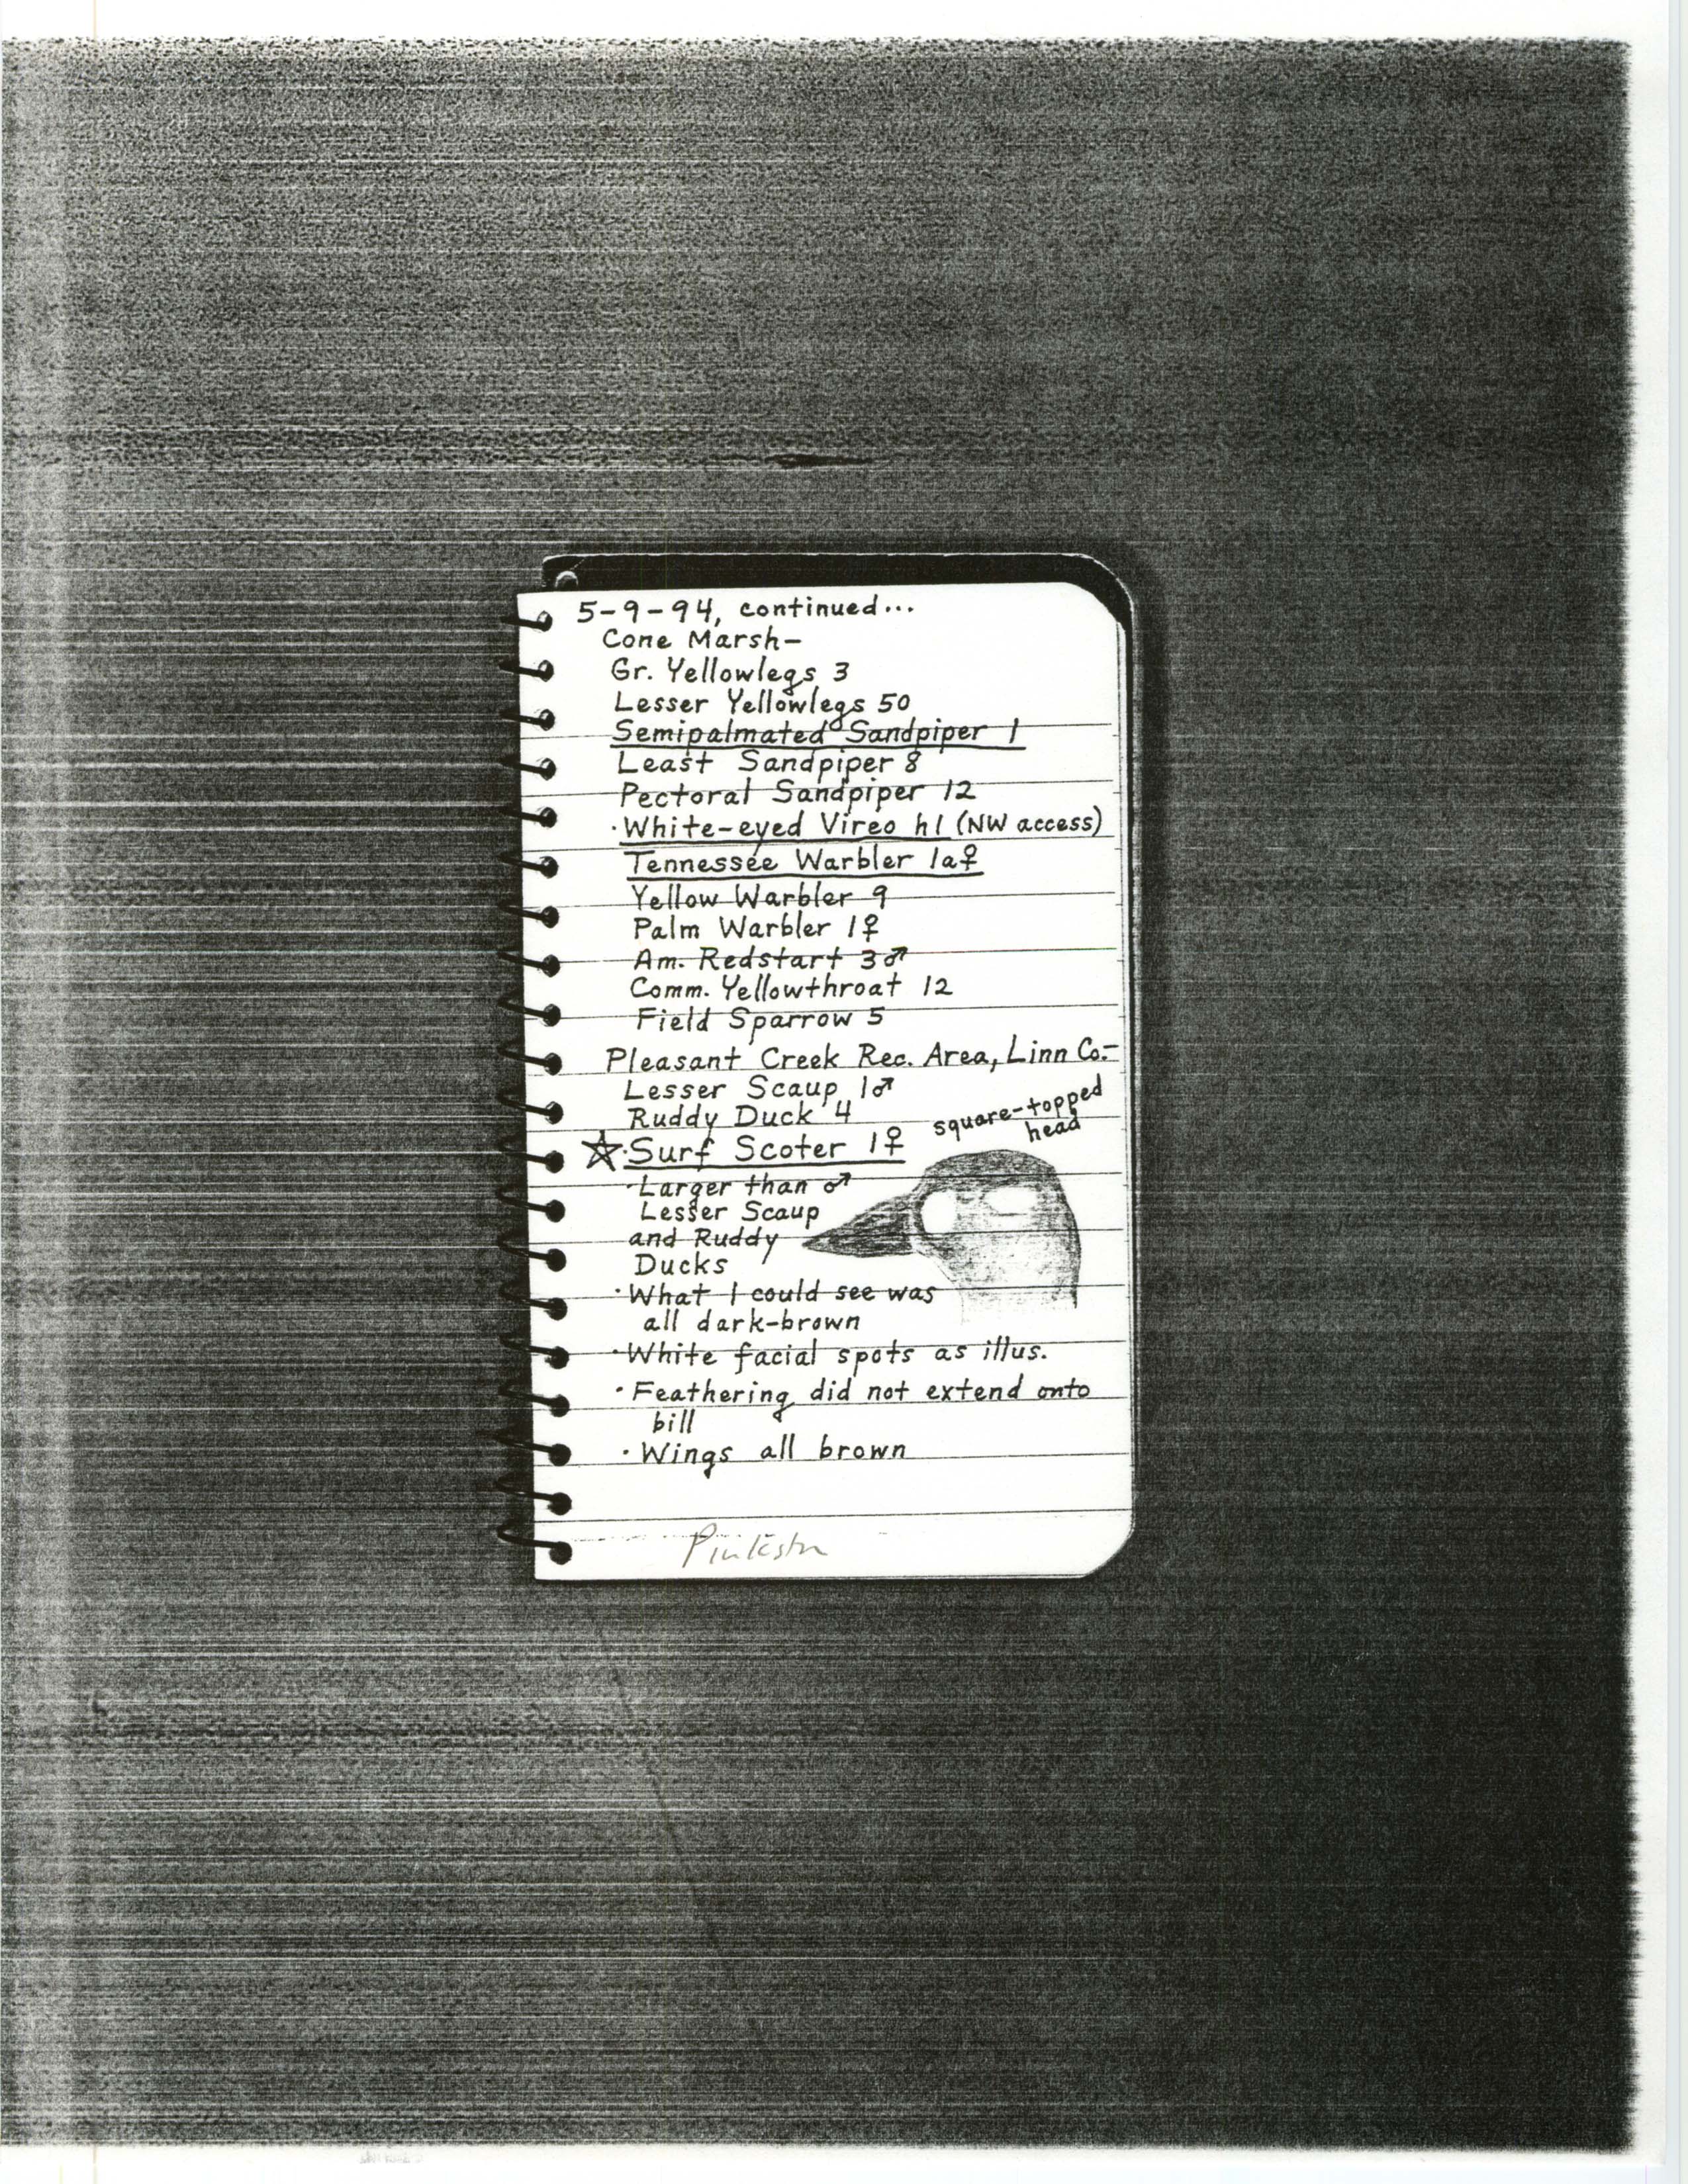 Field notes contributed by Randall Pinkston, May 9, 1994